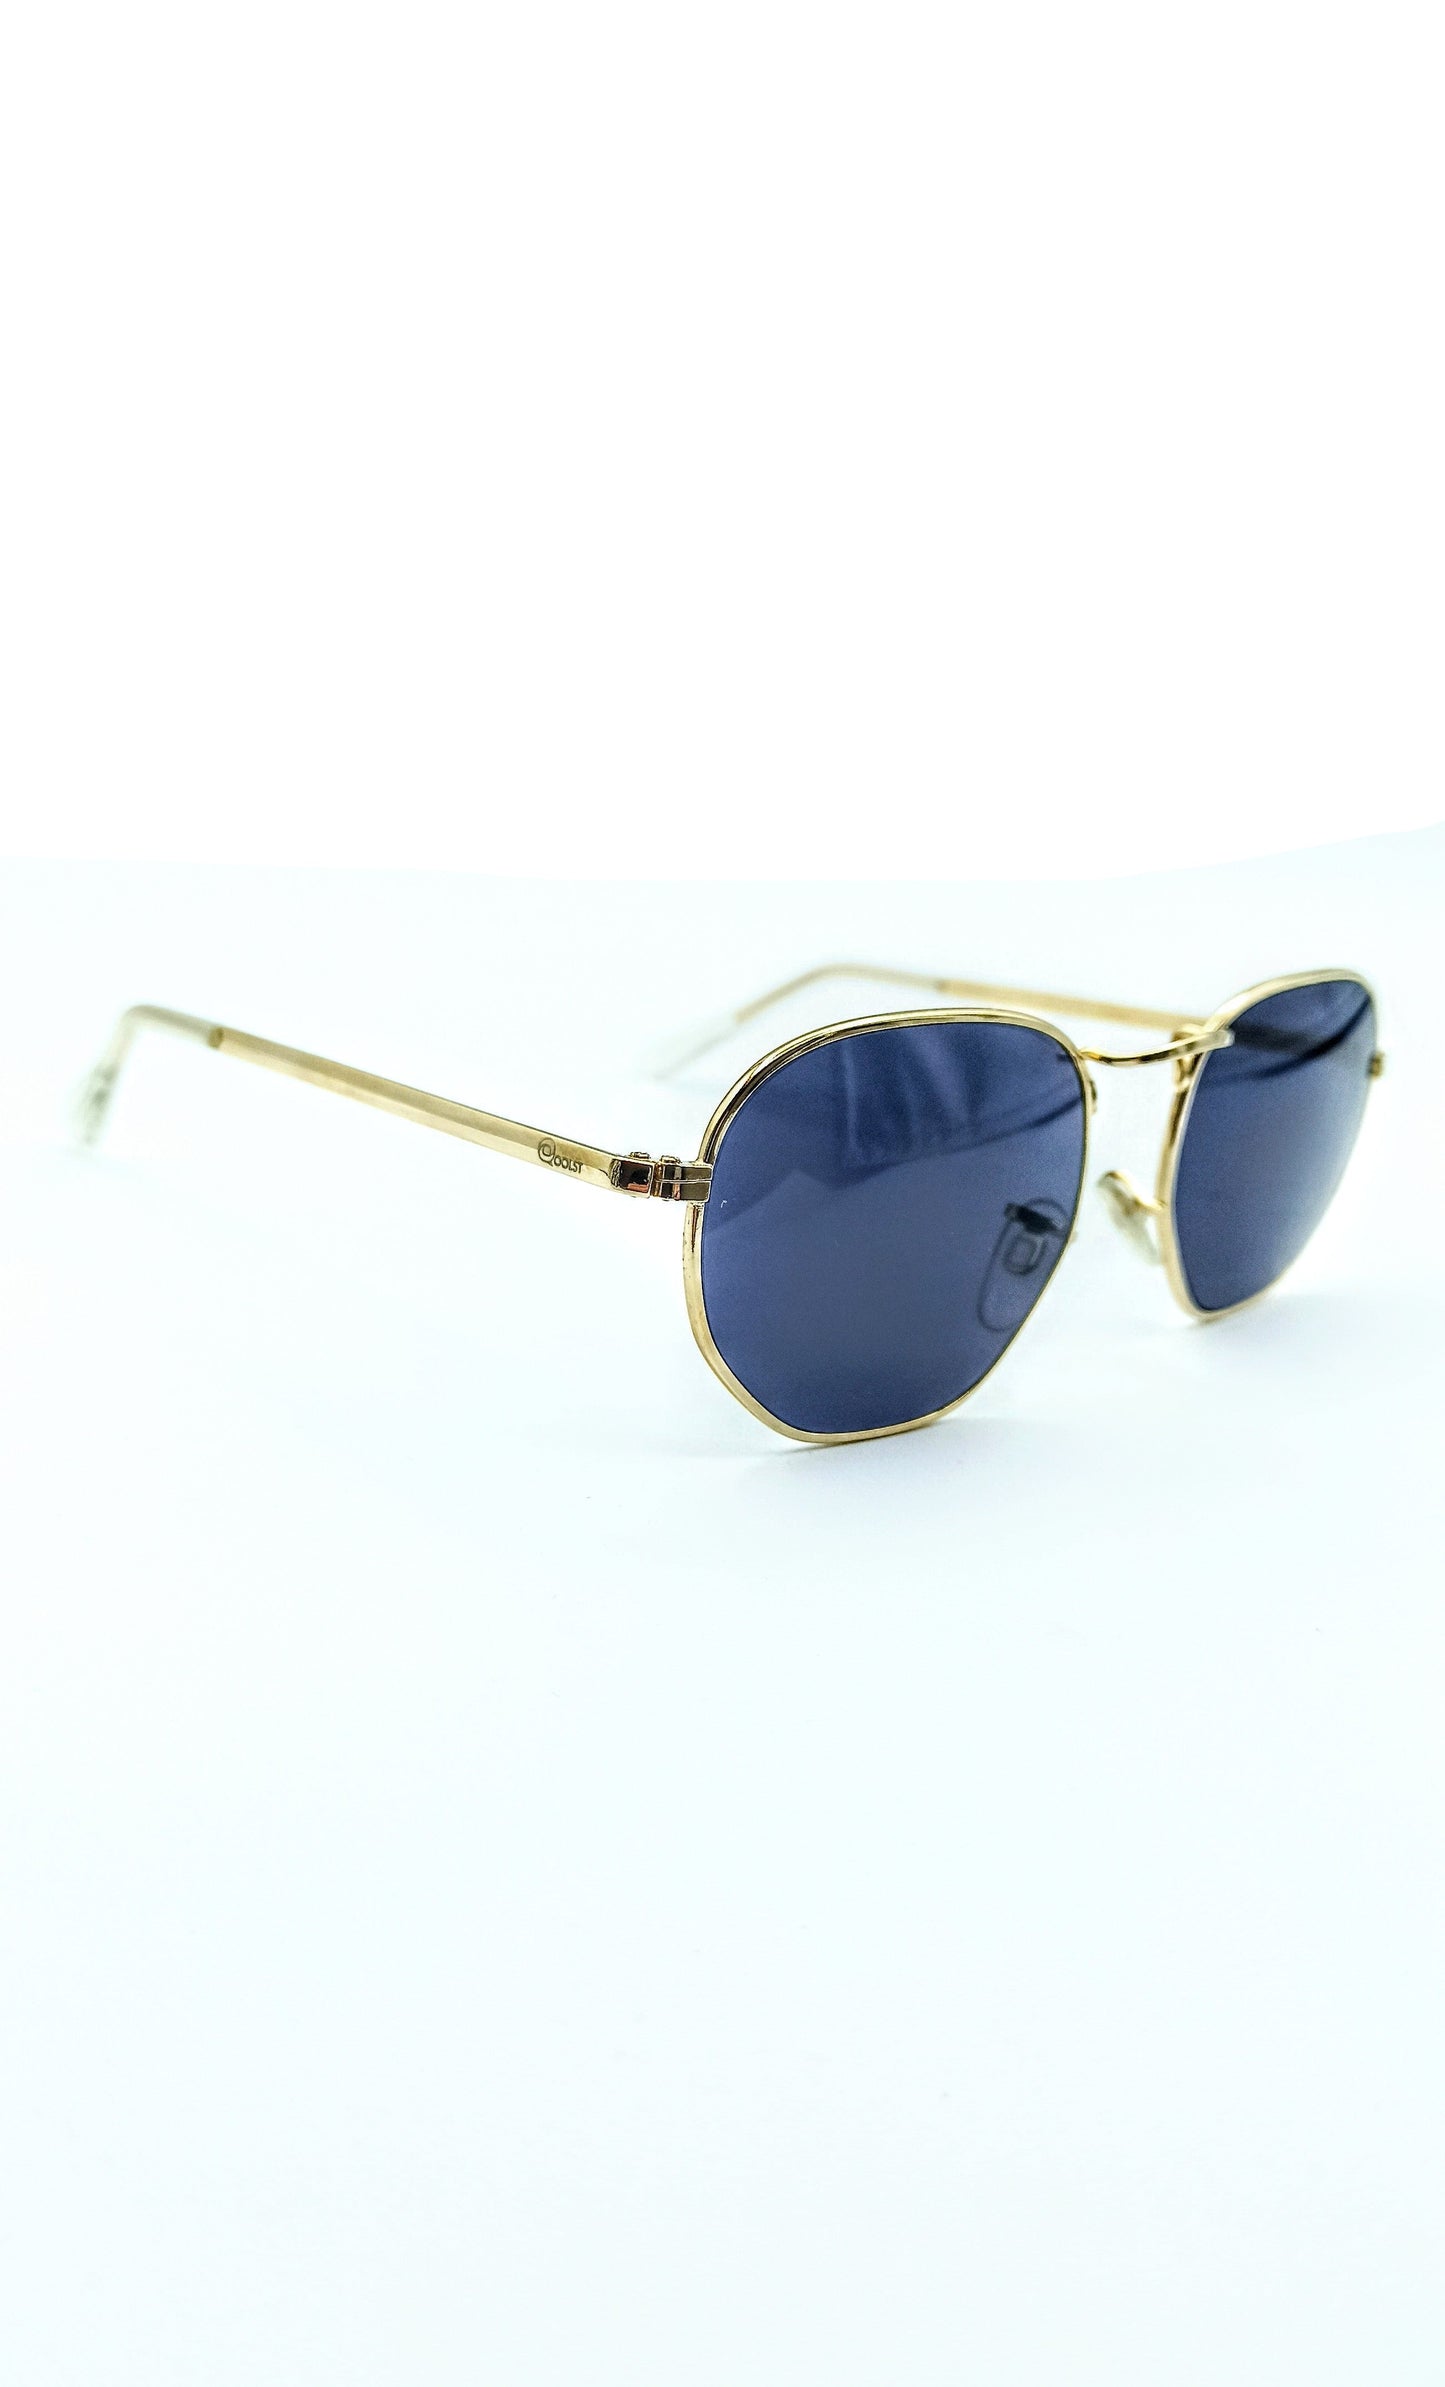 Vintage sunglasses for men and women Qoolst Guilty made in Spain